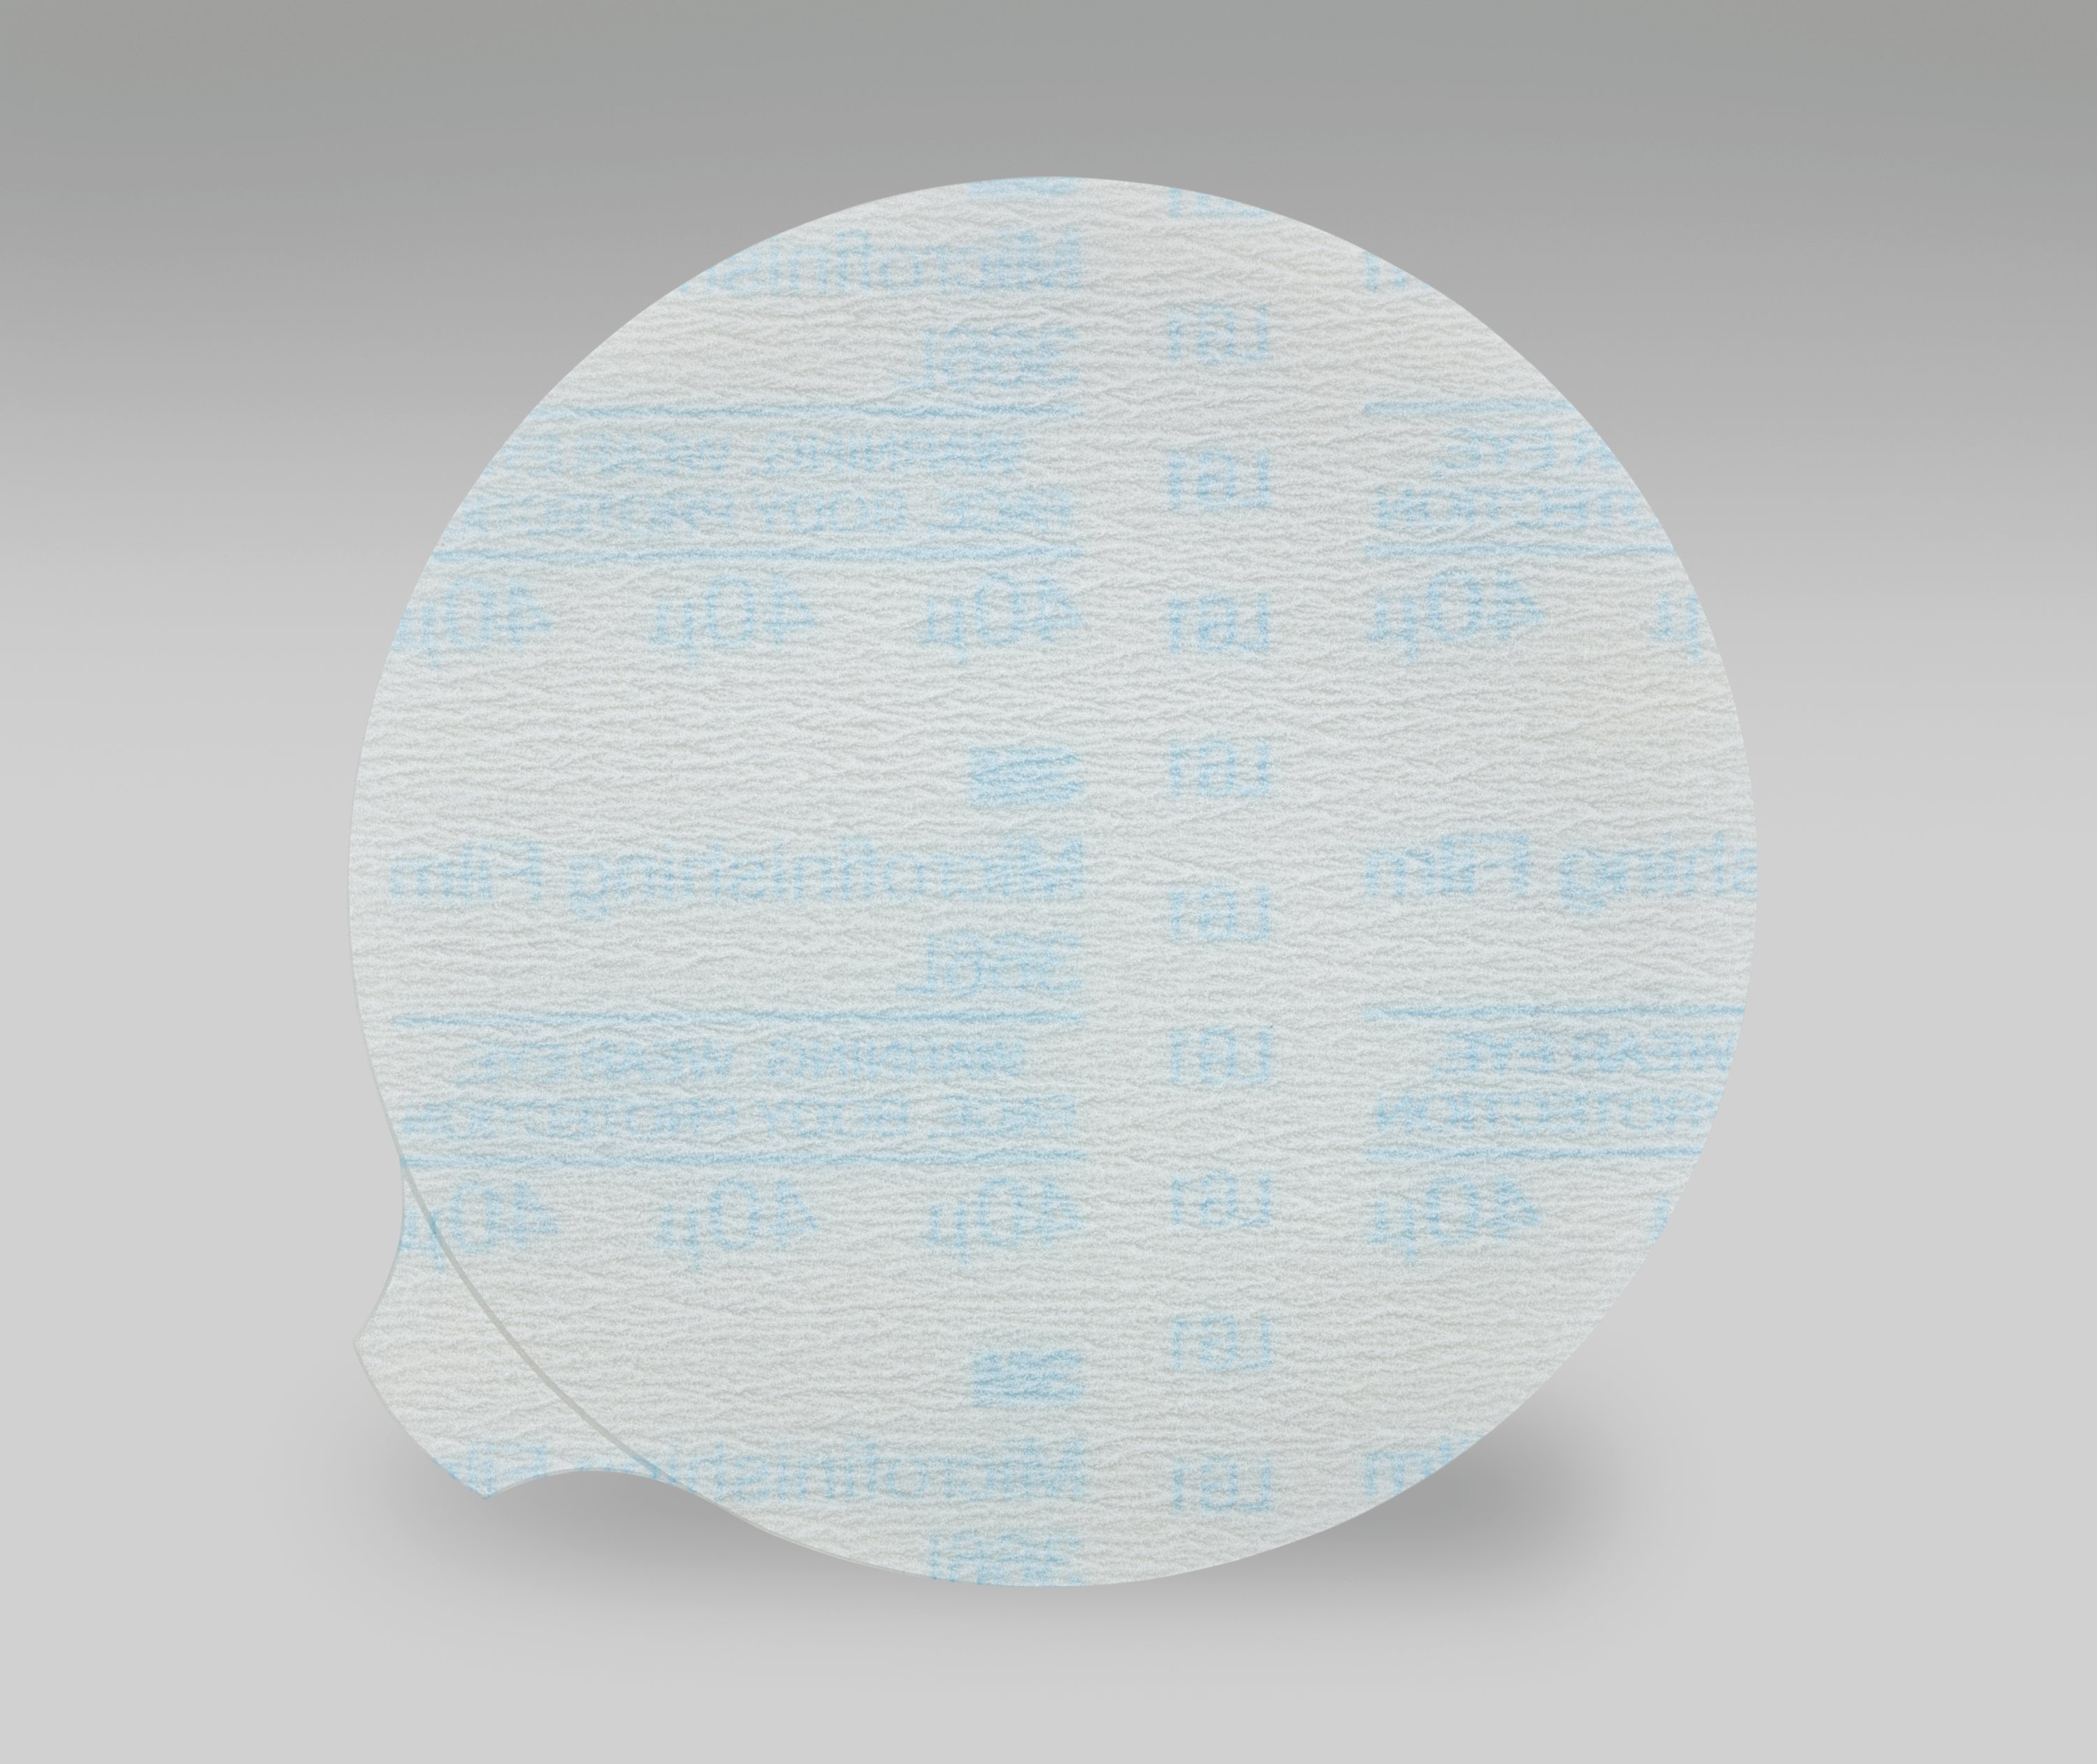 3M™ Microfinishing PSA Film Type D Disc 366L features micron-graded aluminum oxide abrasive bonded to a durable polyester film backing to produce a fast cut-rate and uniform finish on wood, solid surface composites, plastic, fiberglass, paint prep, coating and corrosion removal, primer, e-coat, or metal.